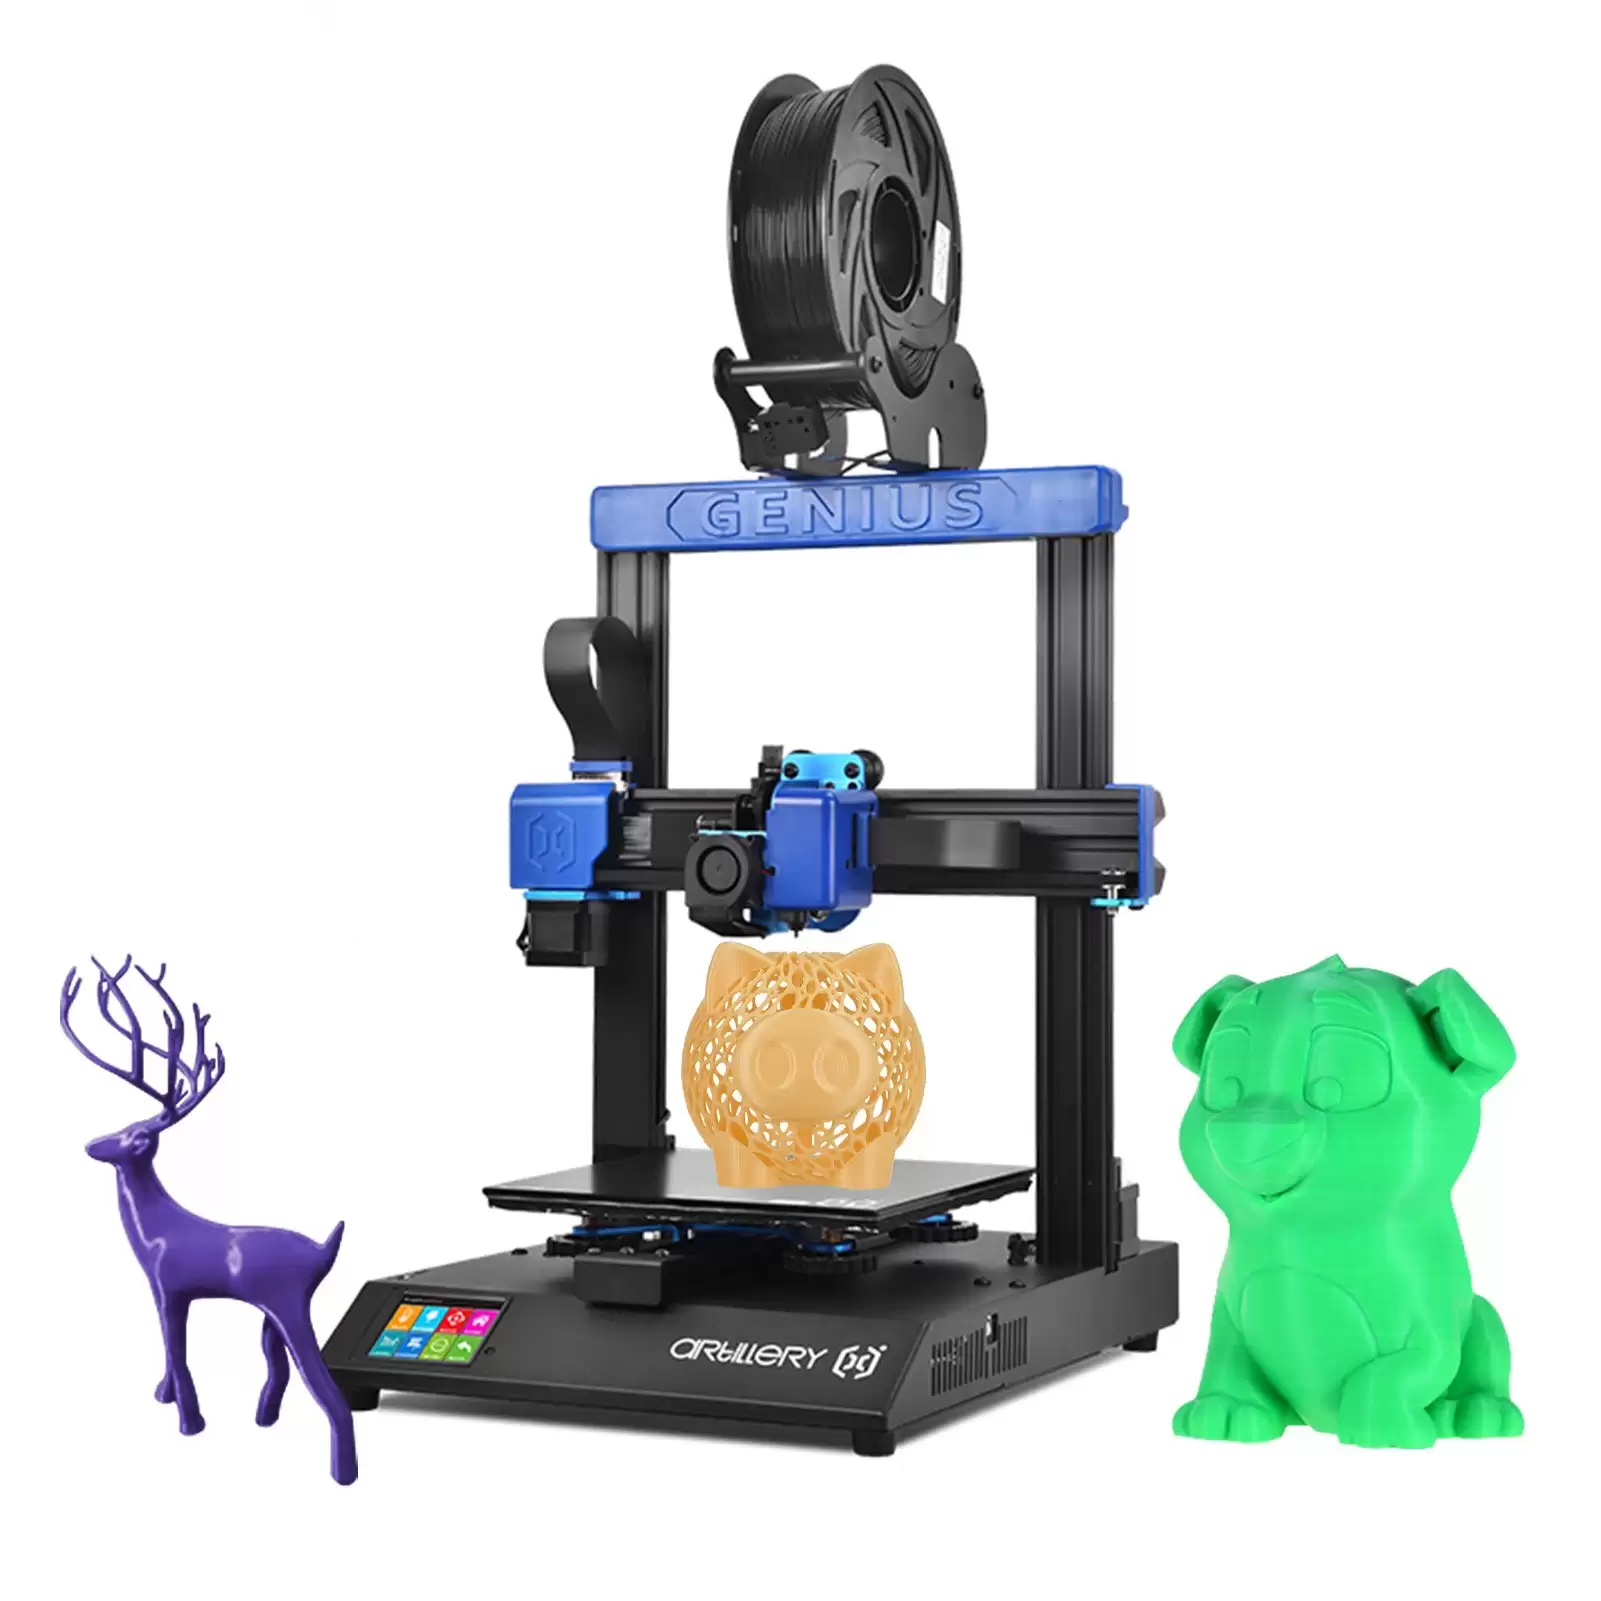 Order In Just $248.99 Artillery Genius Pro 3d Printer 220x220x250mm Printing Size At Tomtop